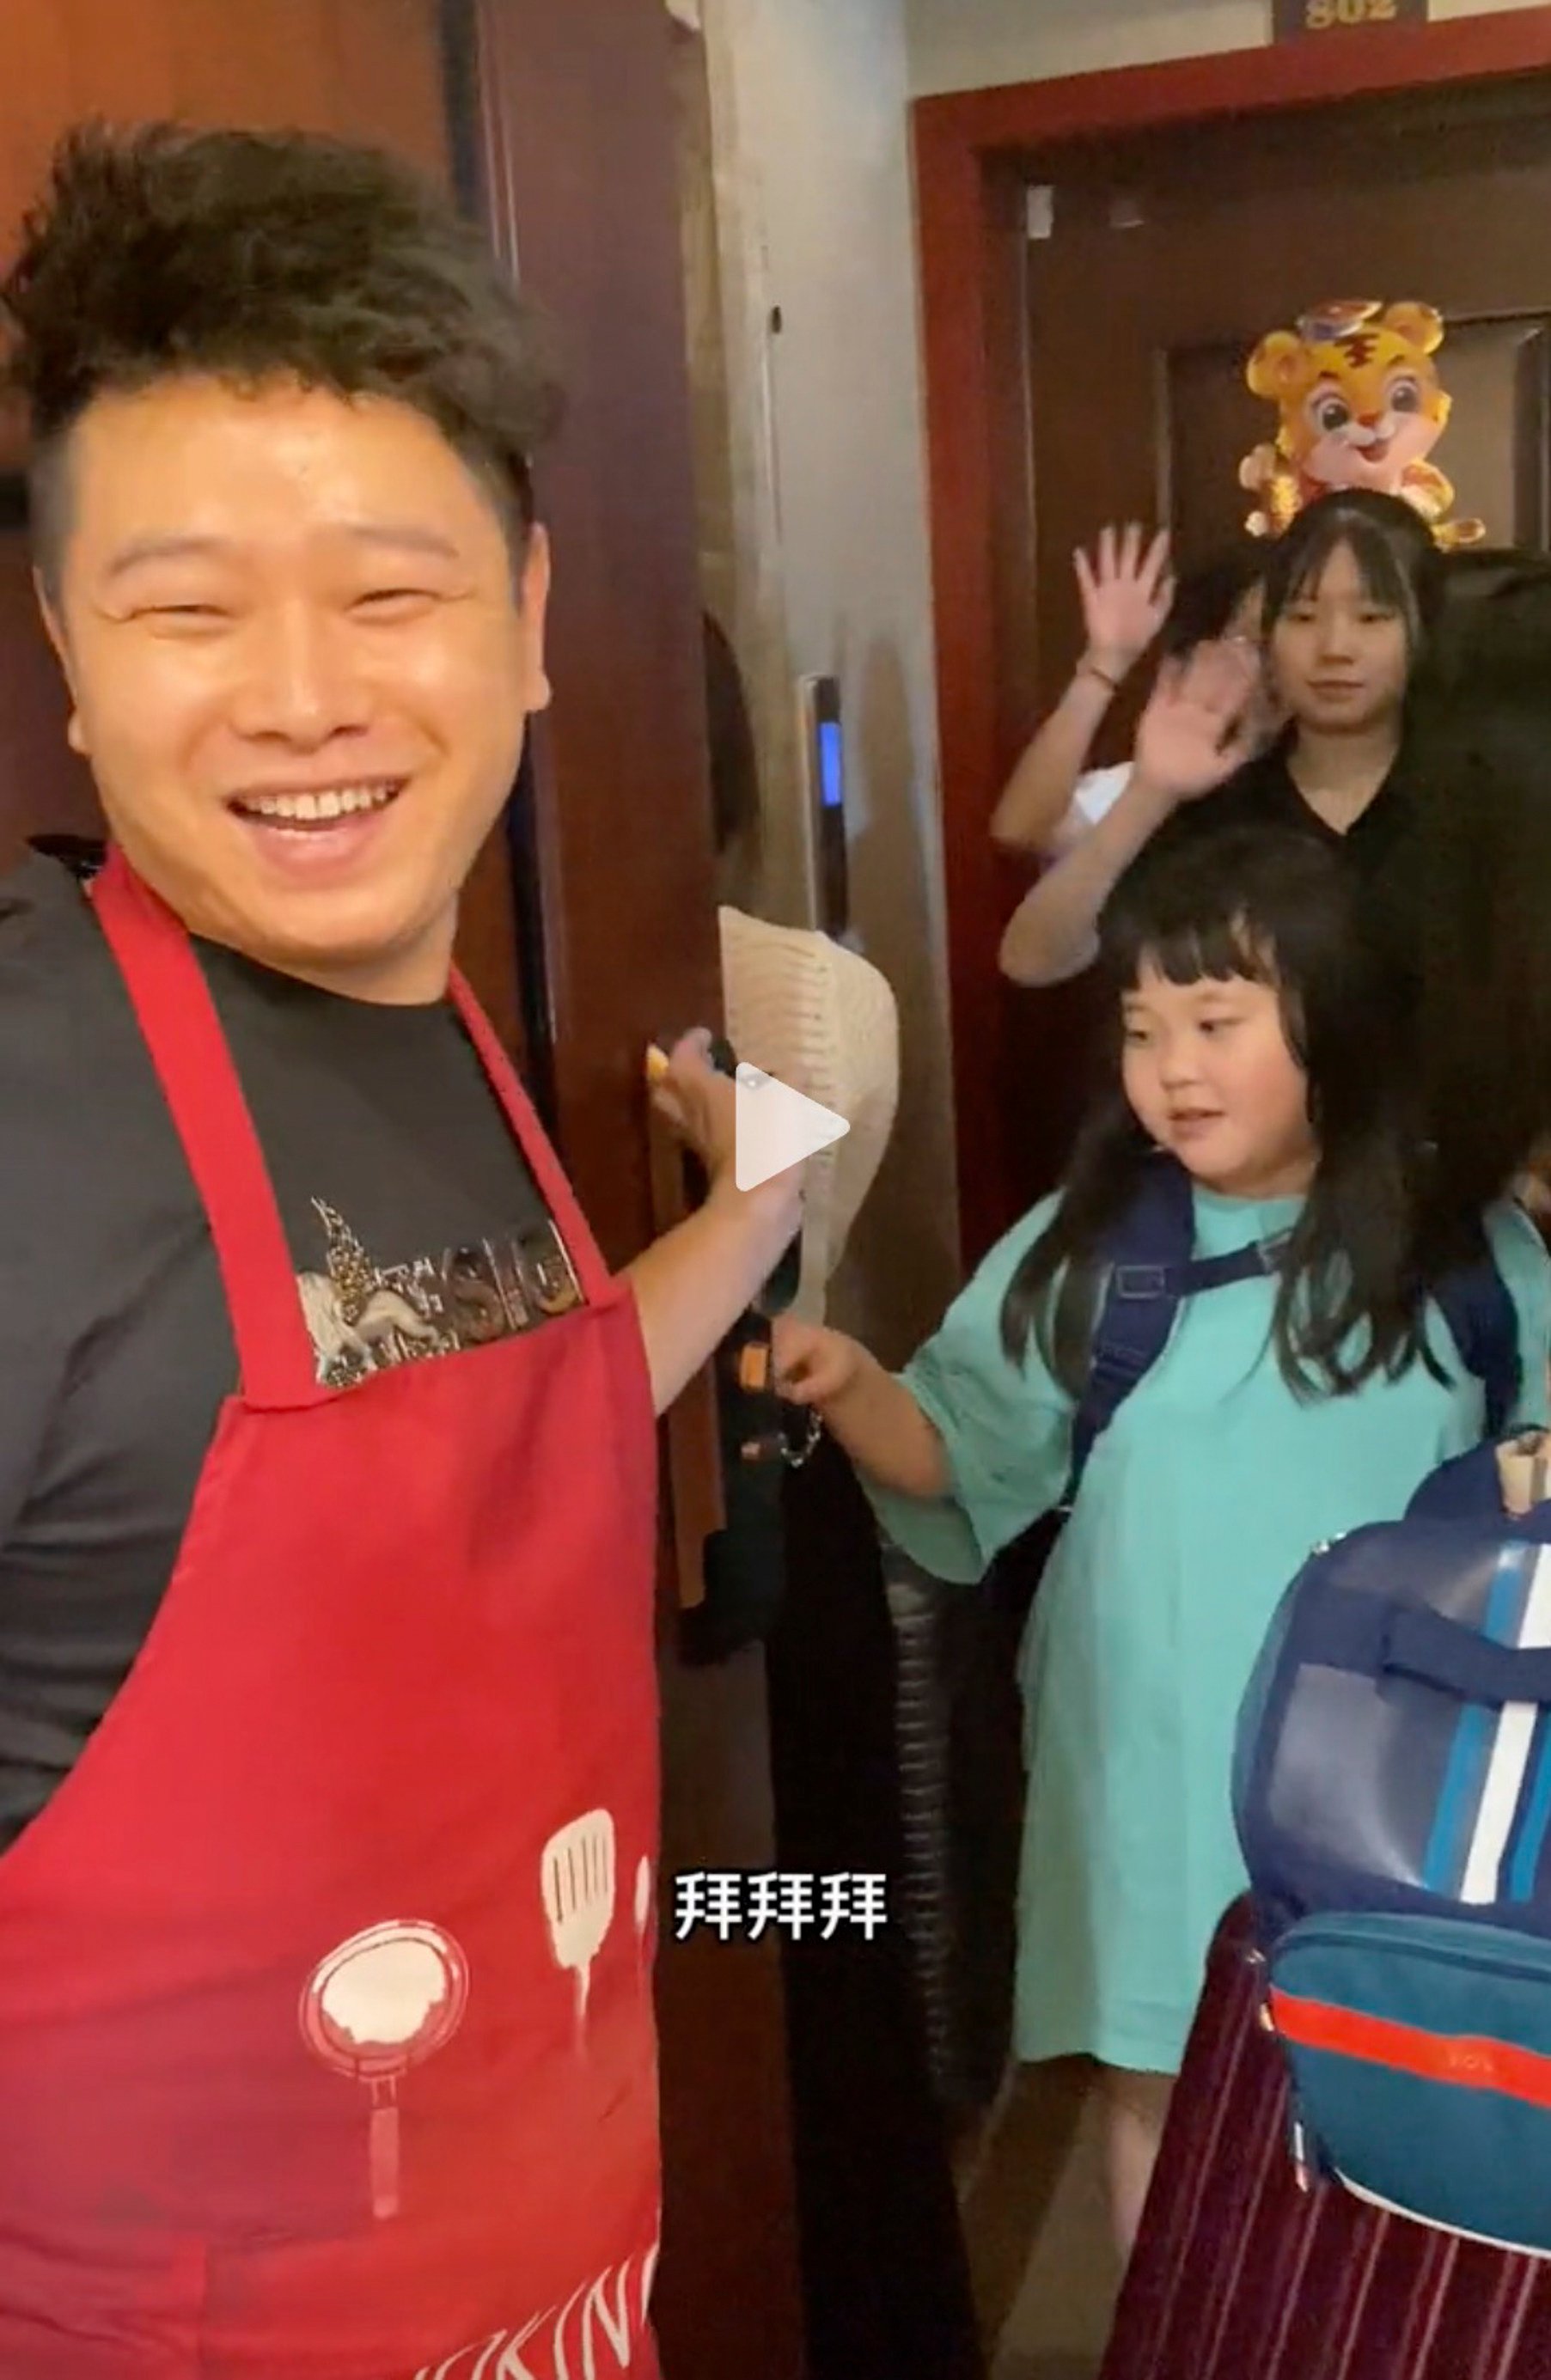 Gong in his red apron from one of his videos saying goodbye to his relatives as the summer holidays come to a close. Photo: Weibo